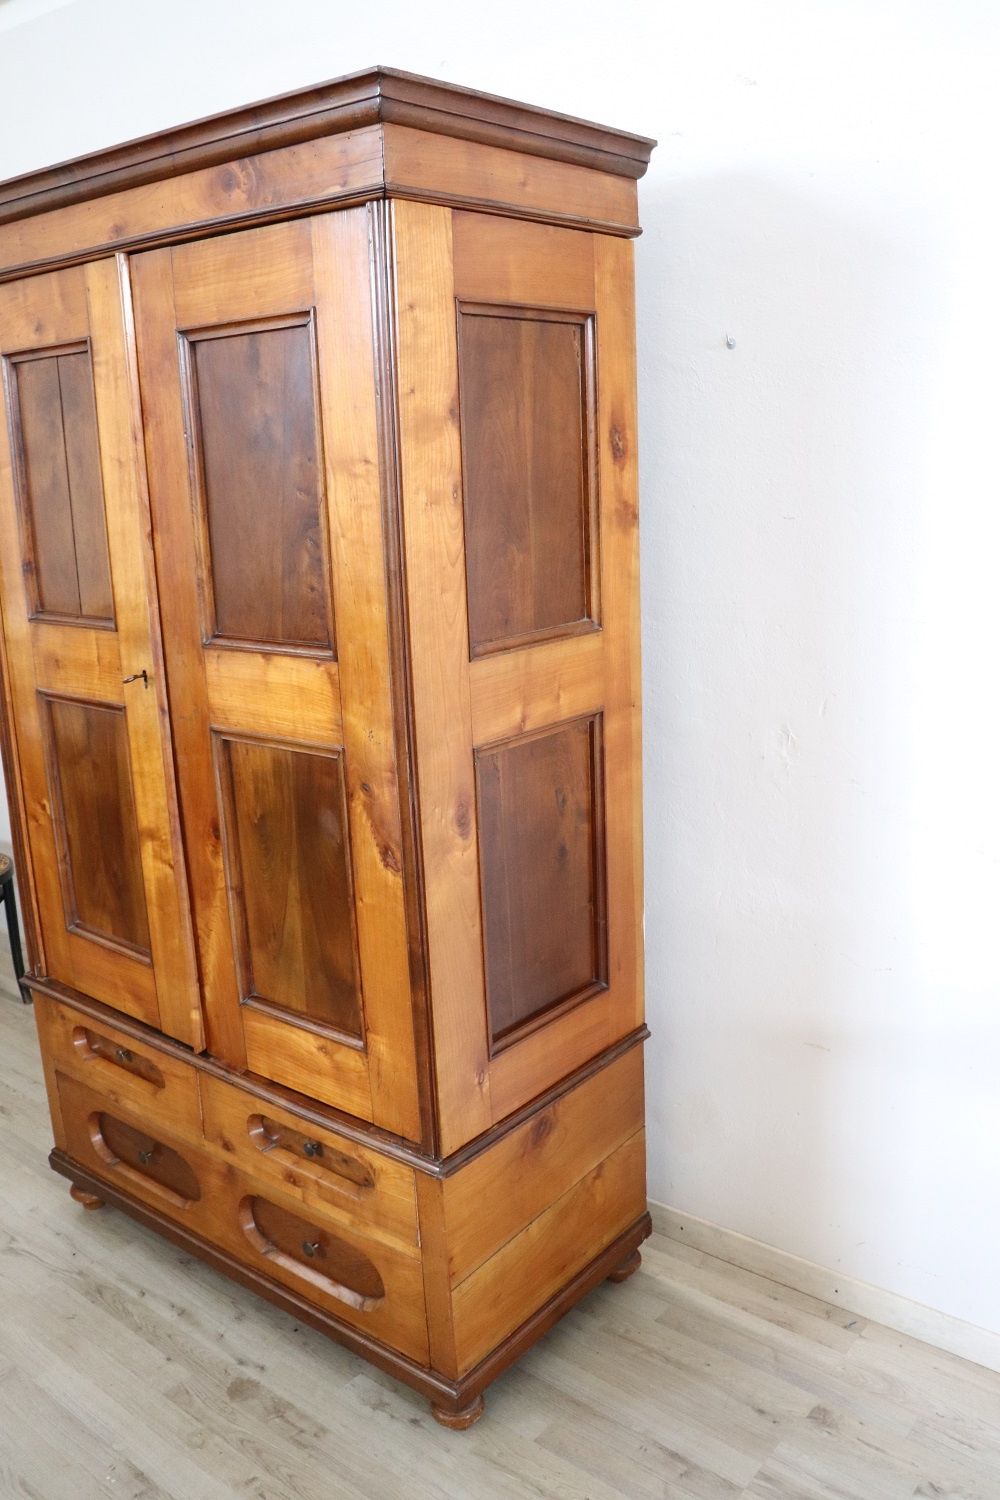 Furniture Of The Past – Antique Wardrobe In Walnut And Solid Cherry, Xix  Century Regarding Antique Wardrobes (View 6 of 20)